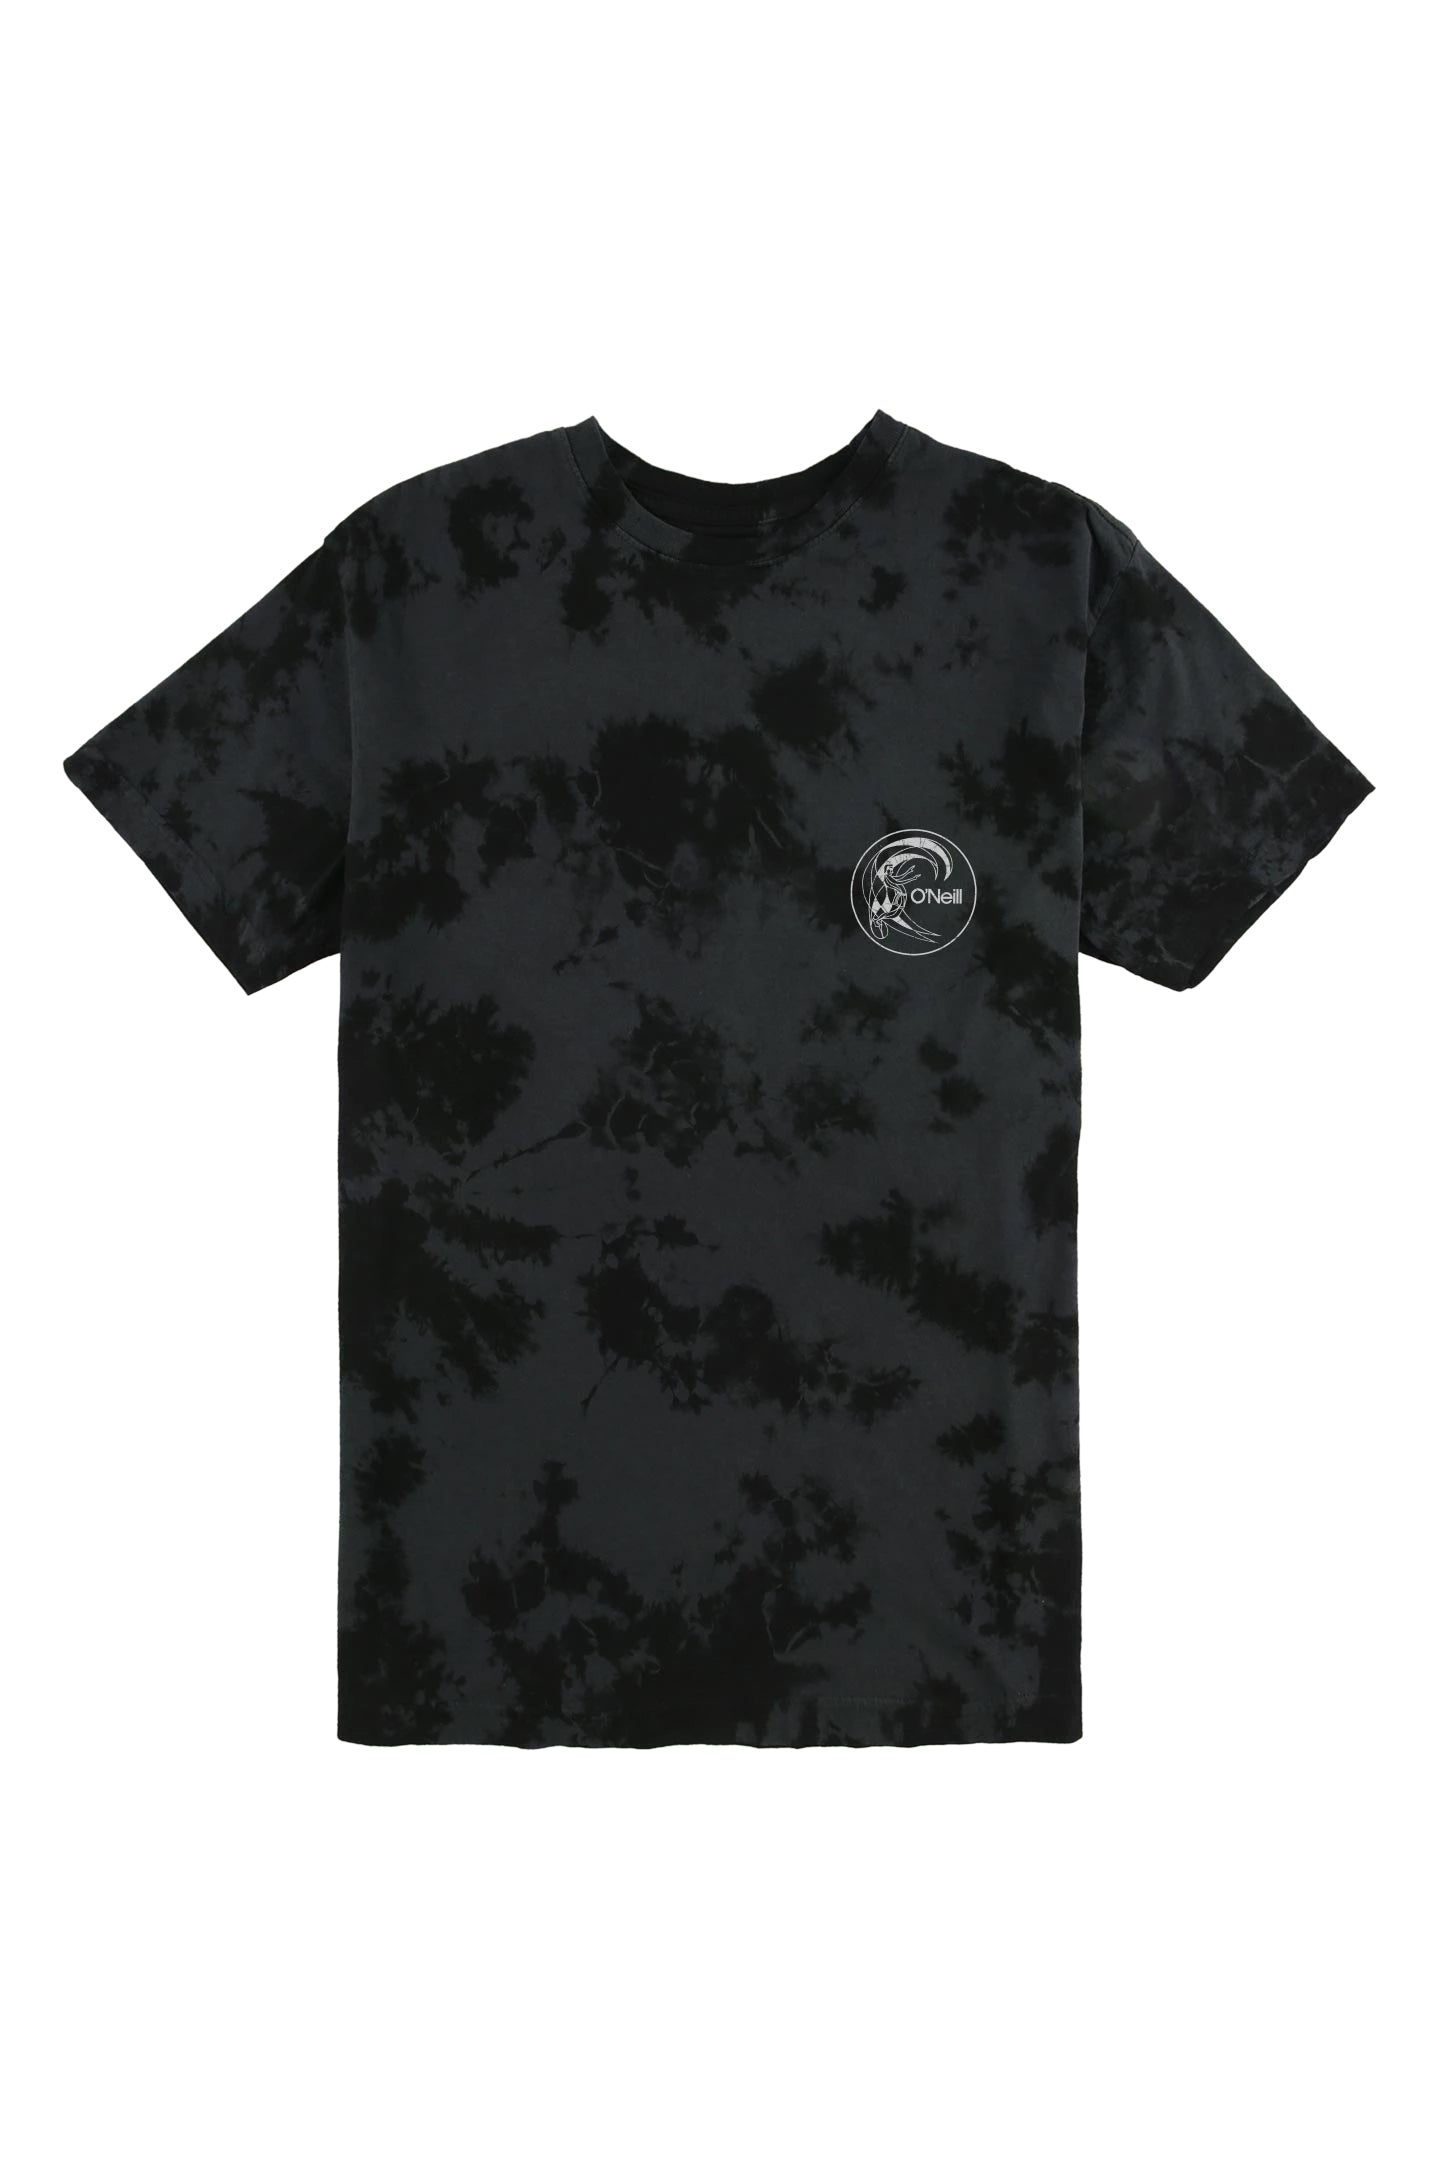 O'neill Psyched Tee DCH-DarkCharcoal L